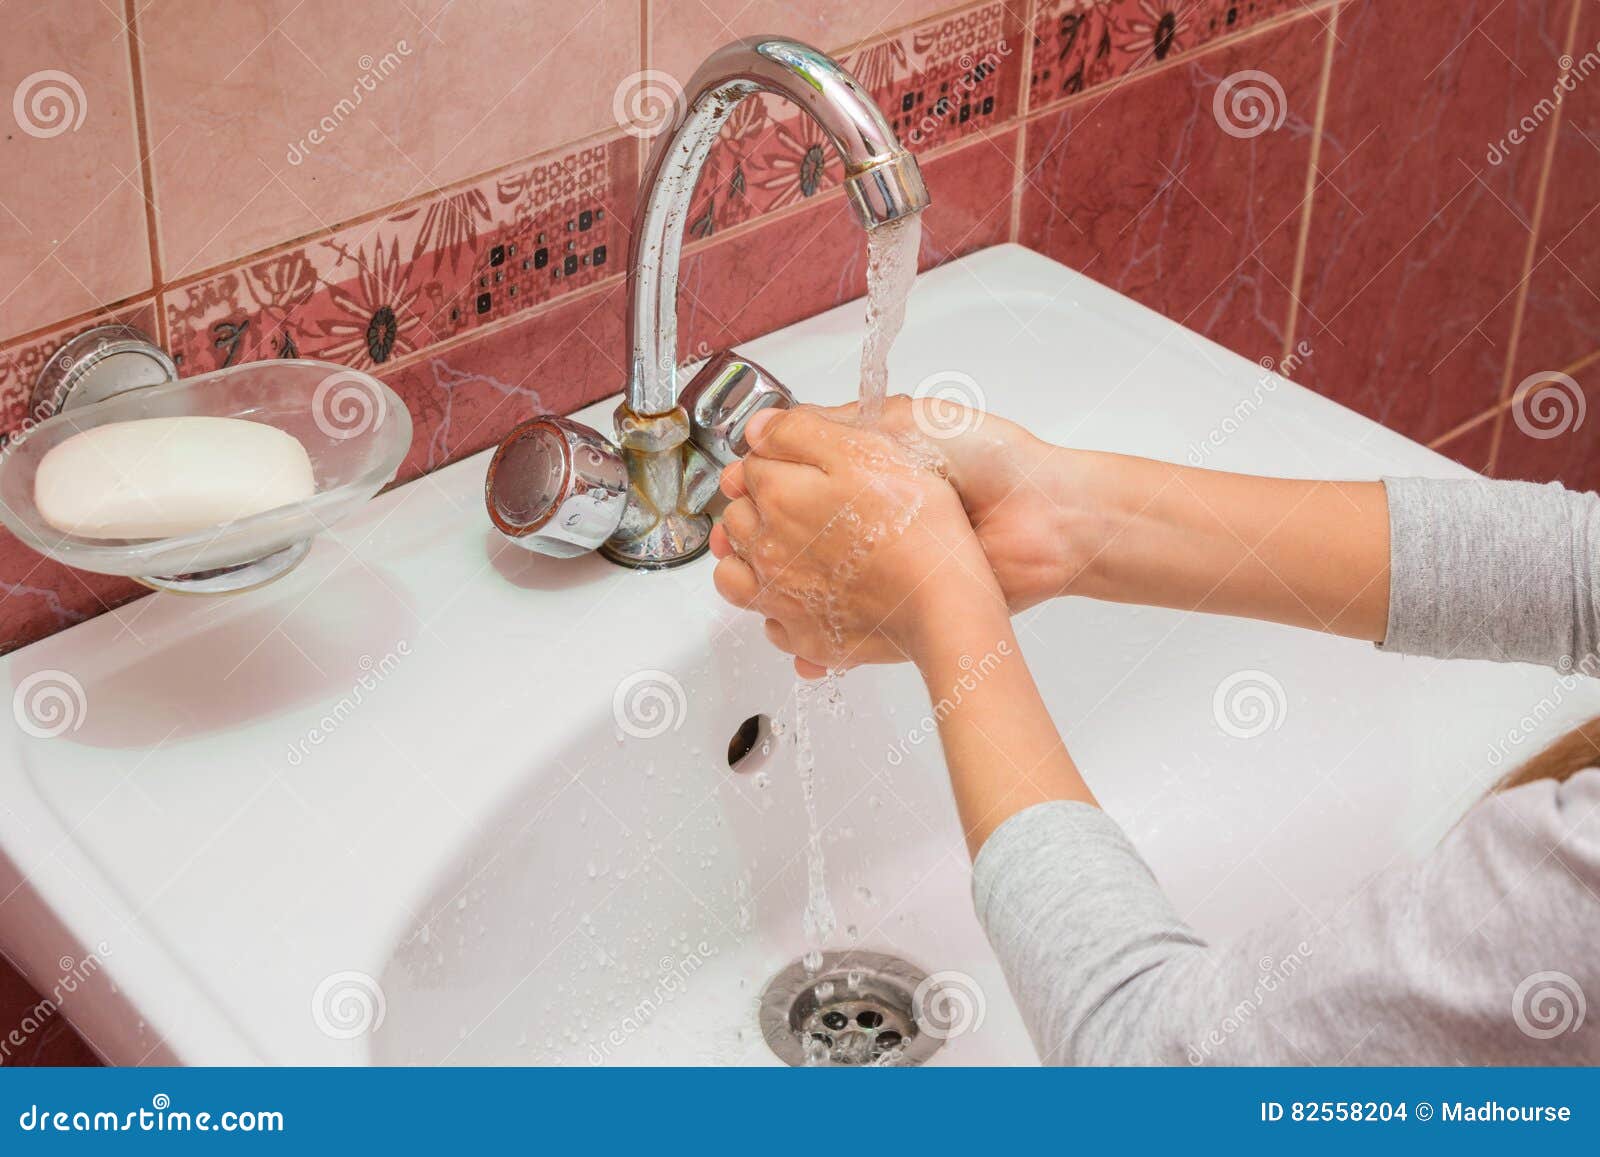 Child Washes His Hands Under Running Water in the Sink Stock Photo